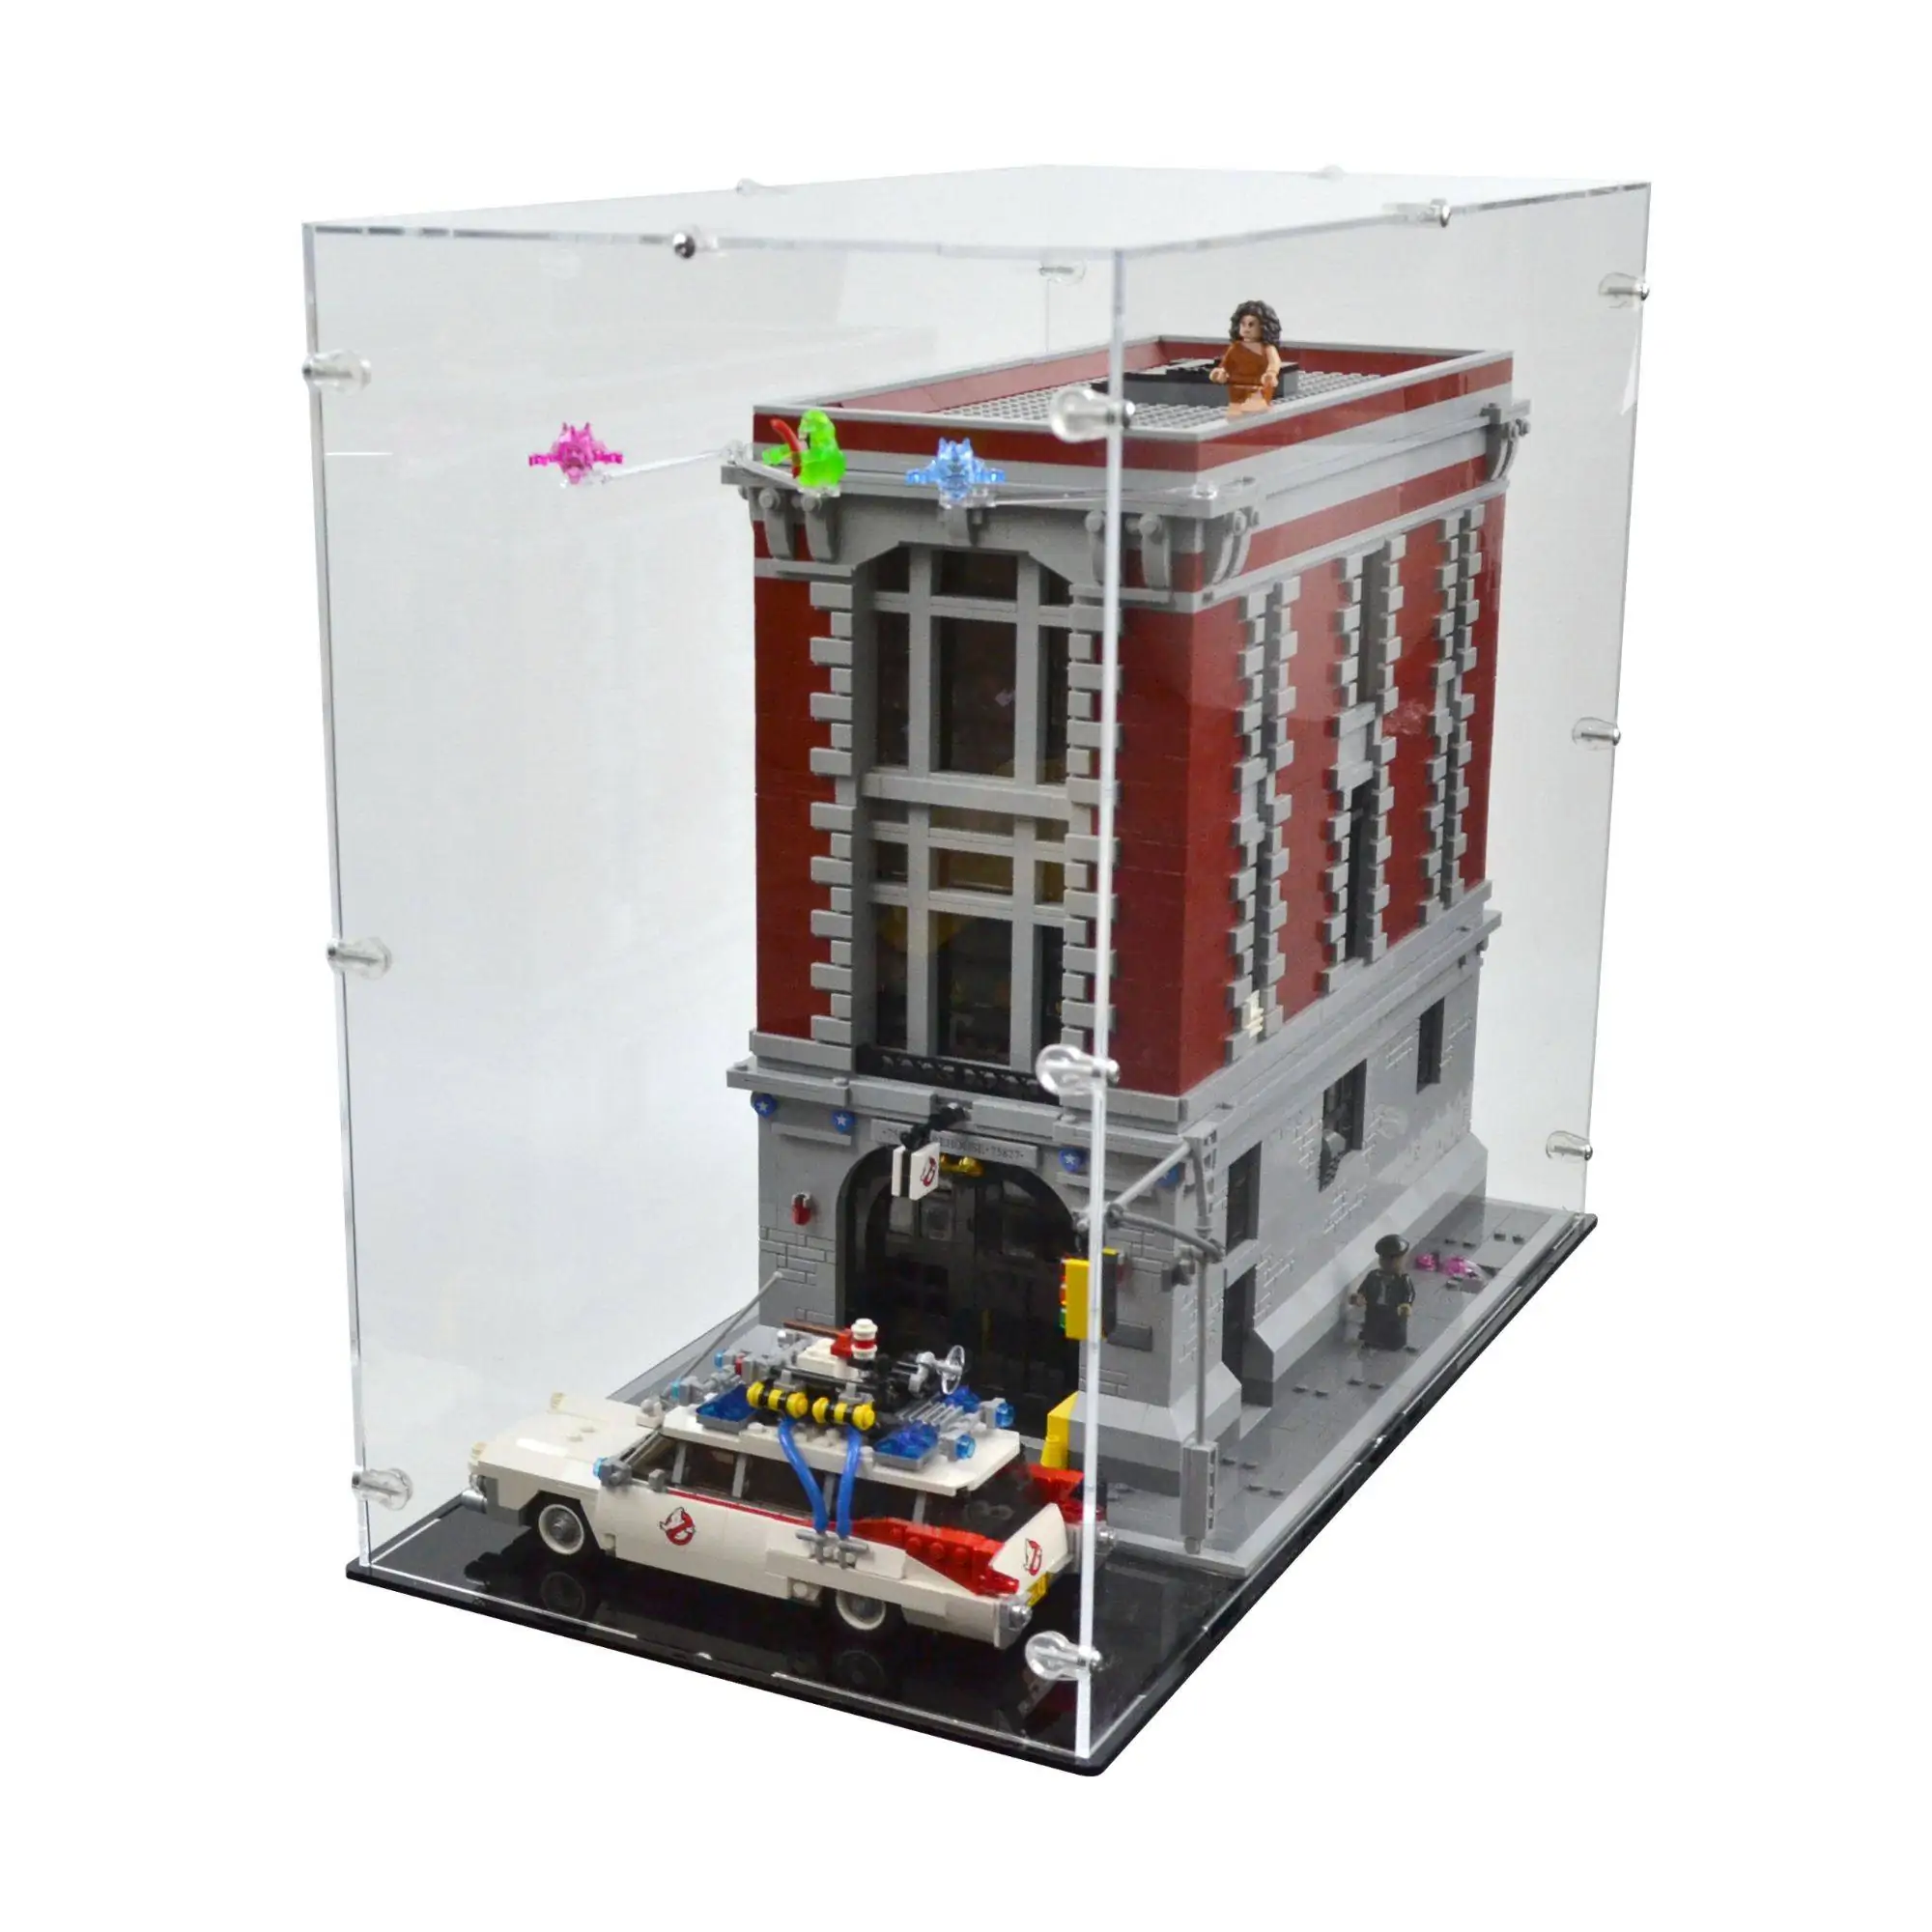 LEGO Ghostbusters Firehouse HQ Closed Display Case | iDisplayit